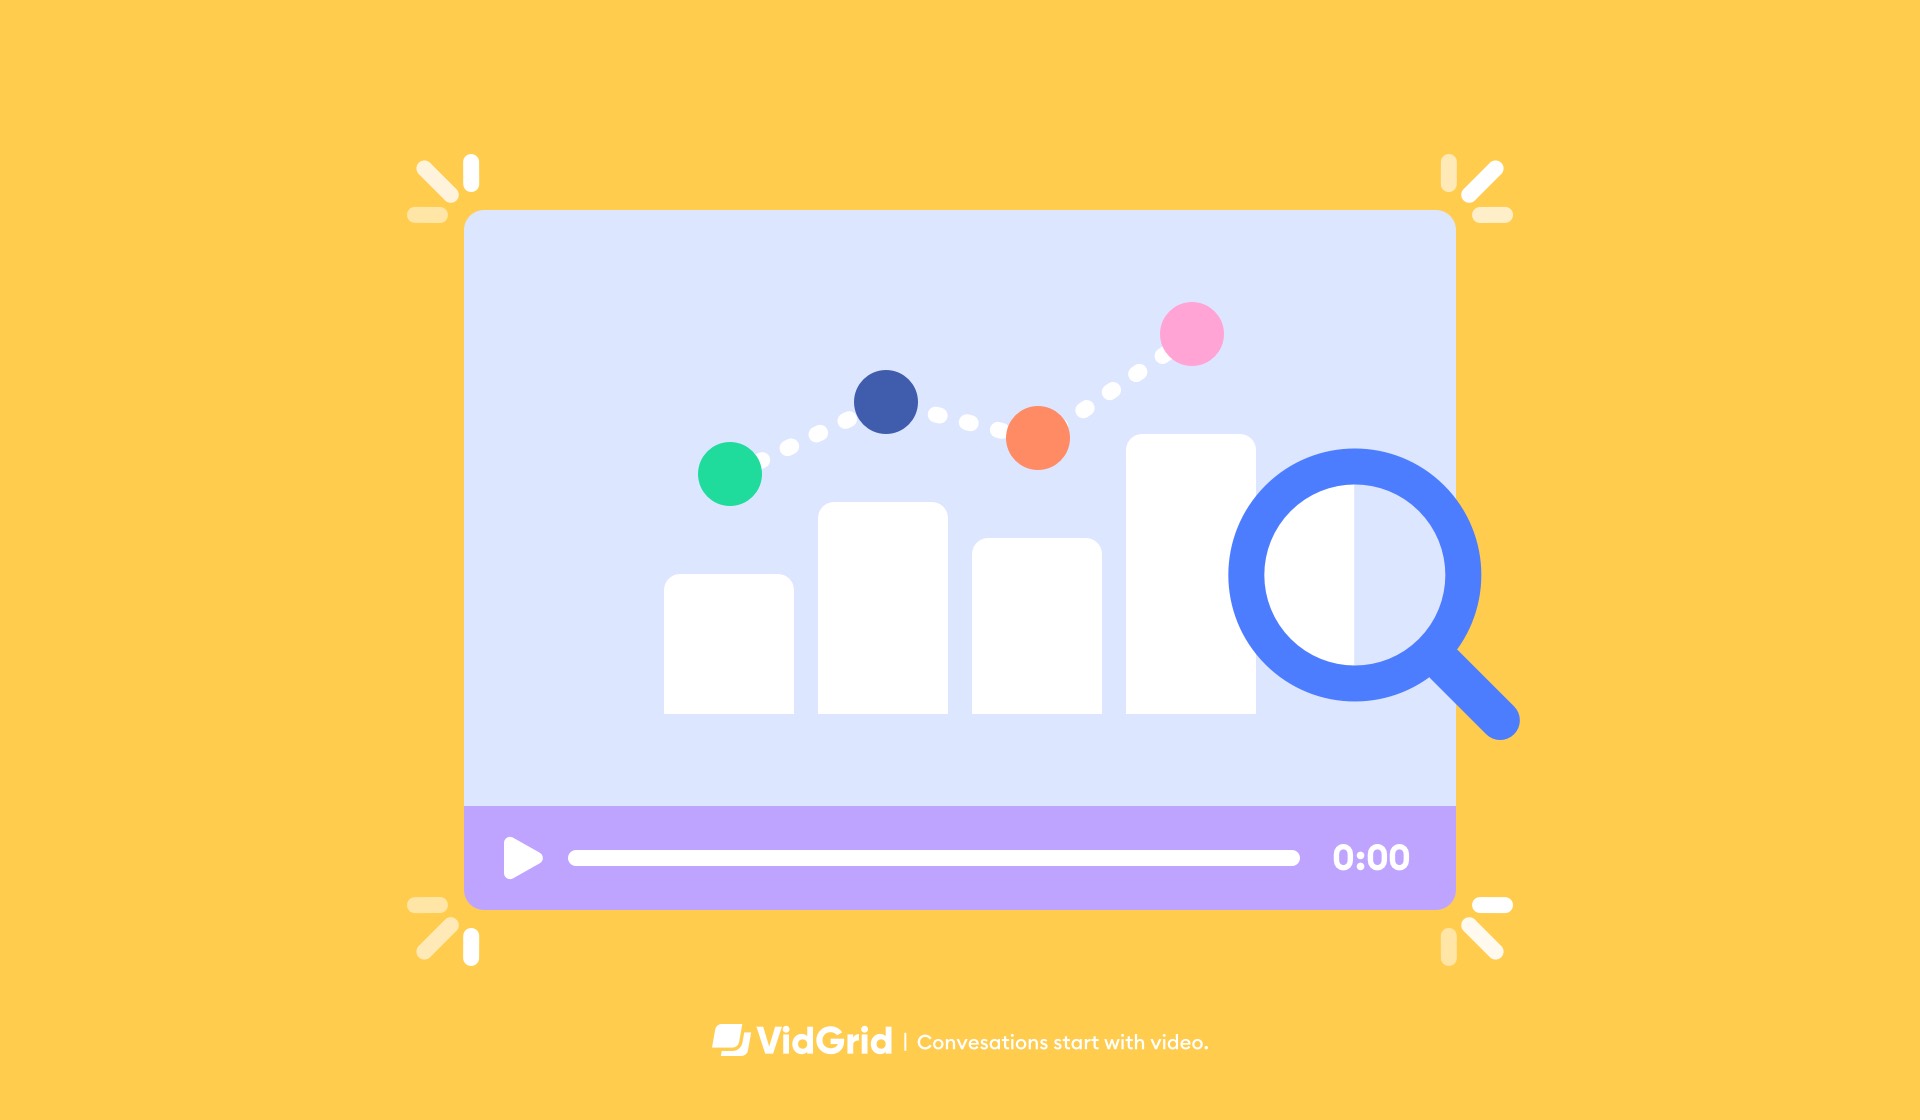 Use Video Data and Analytics to Enhance Performance